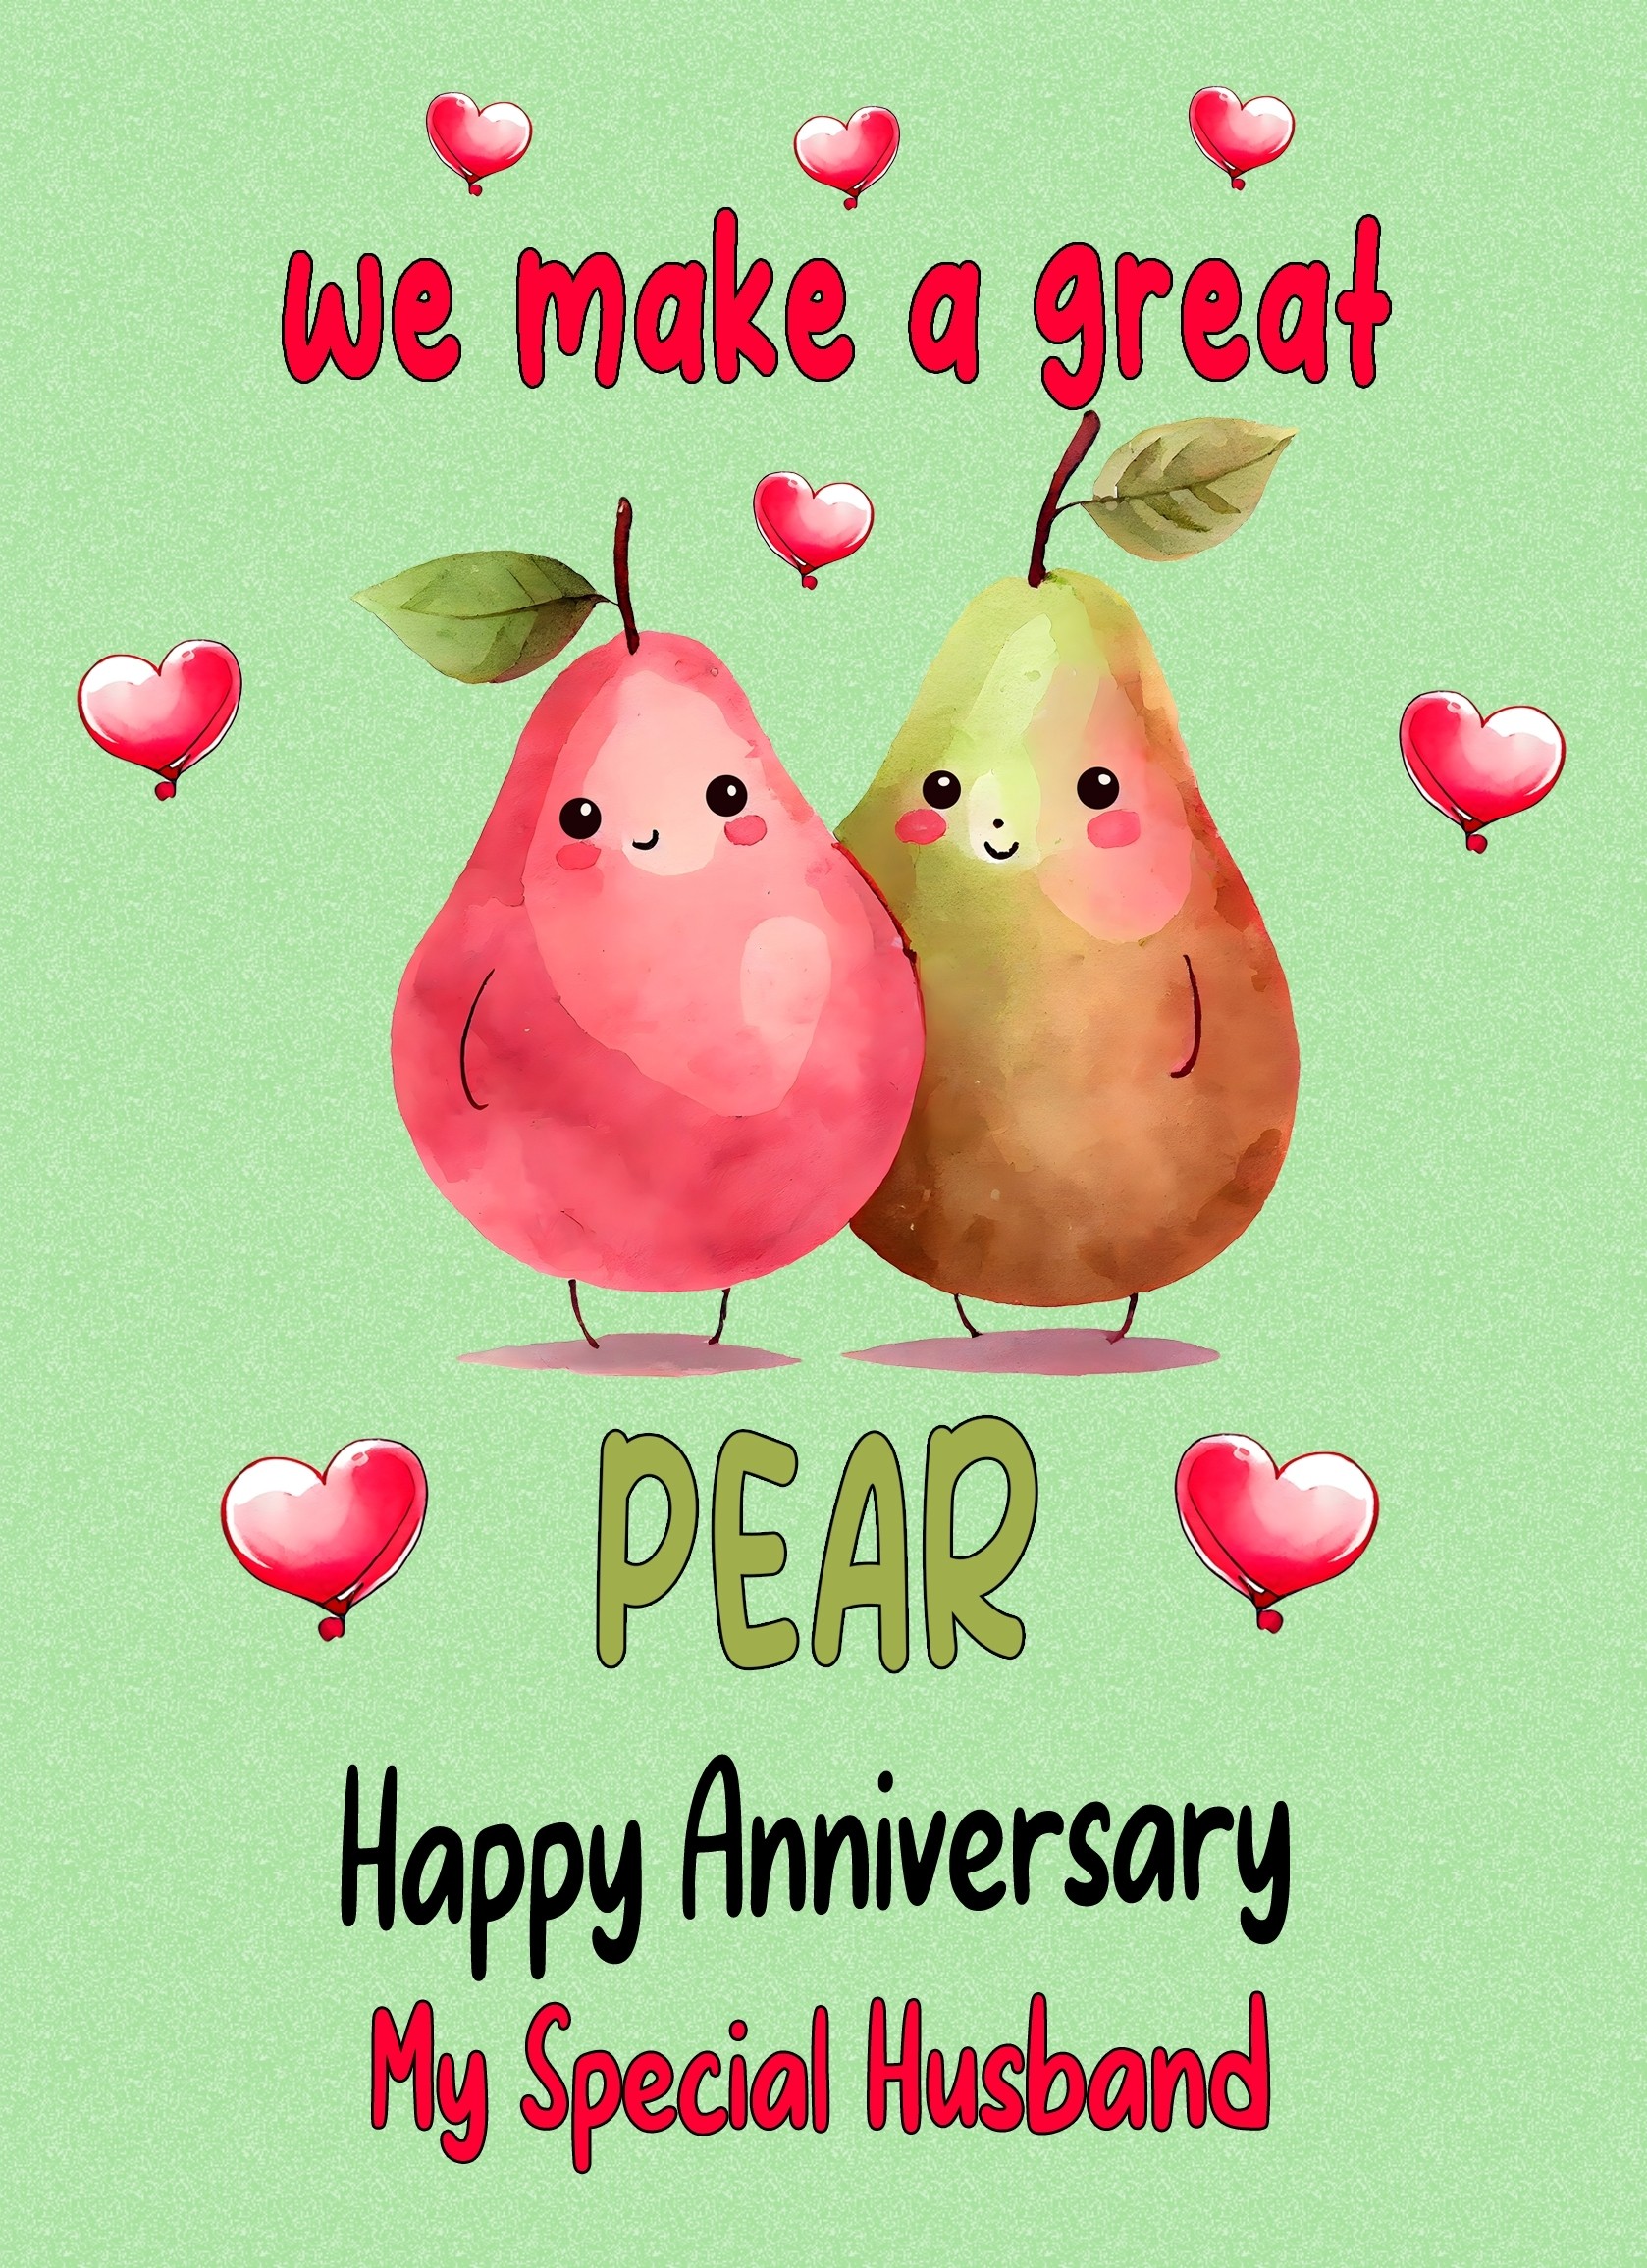 Funny Pun Romantic Anniversary Card for Husband (Great Pear)